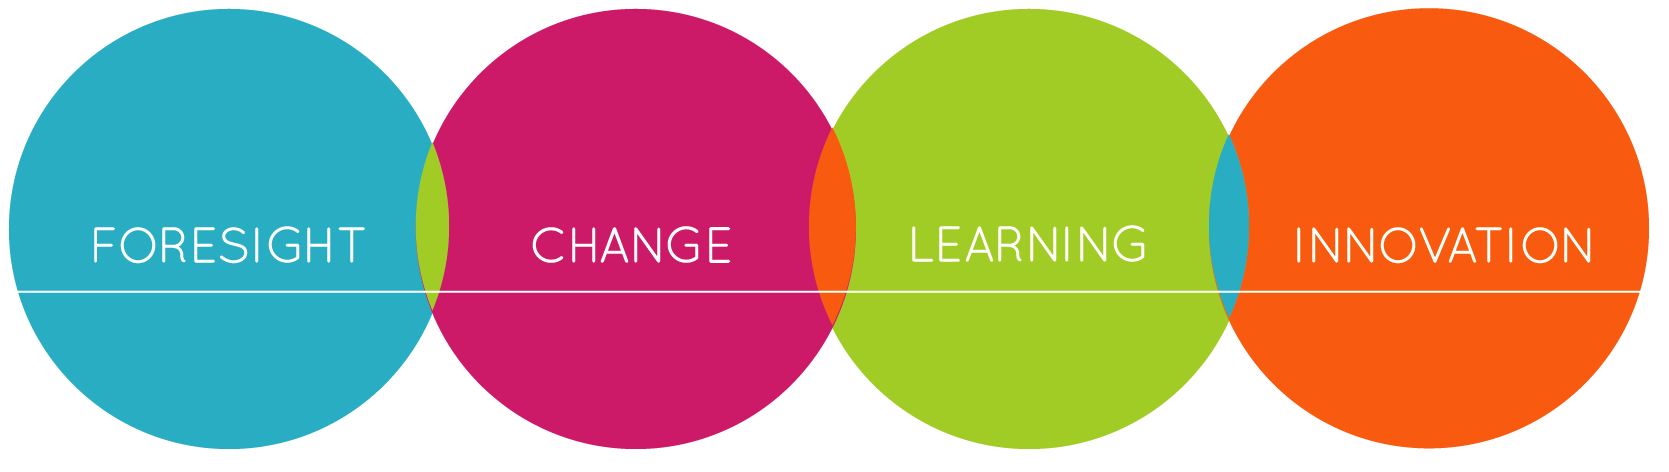 Foresight, change, learning, innovation infographic.